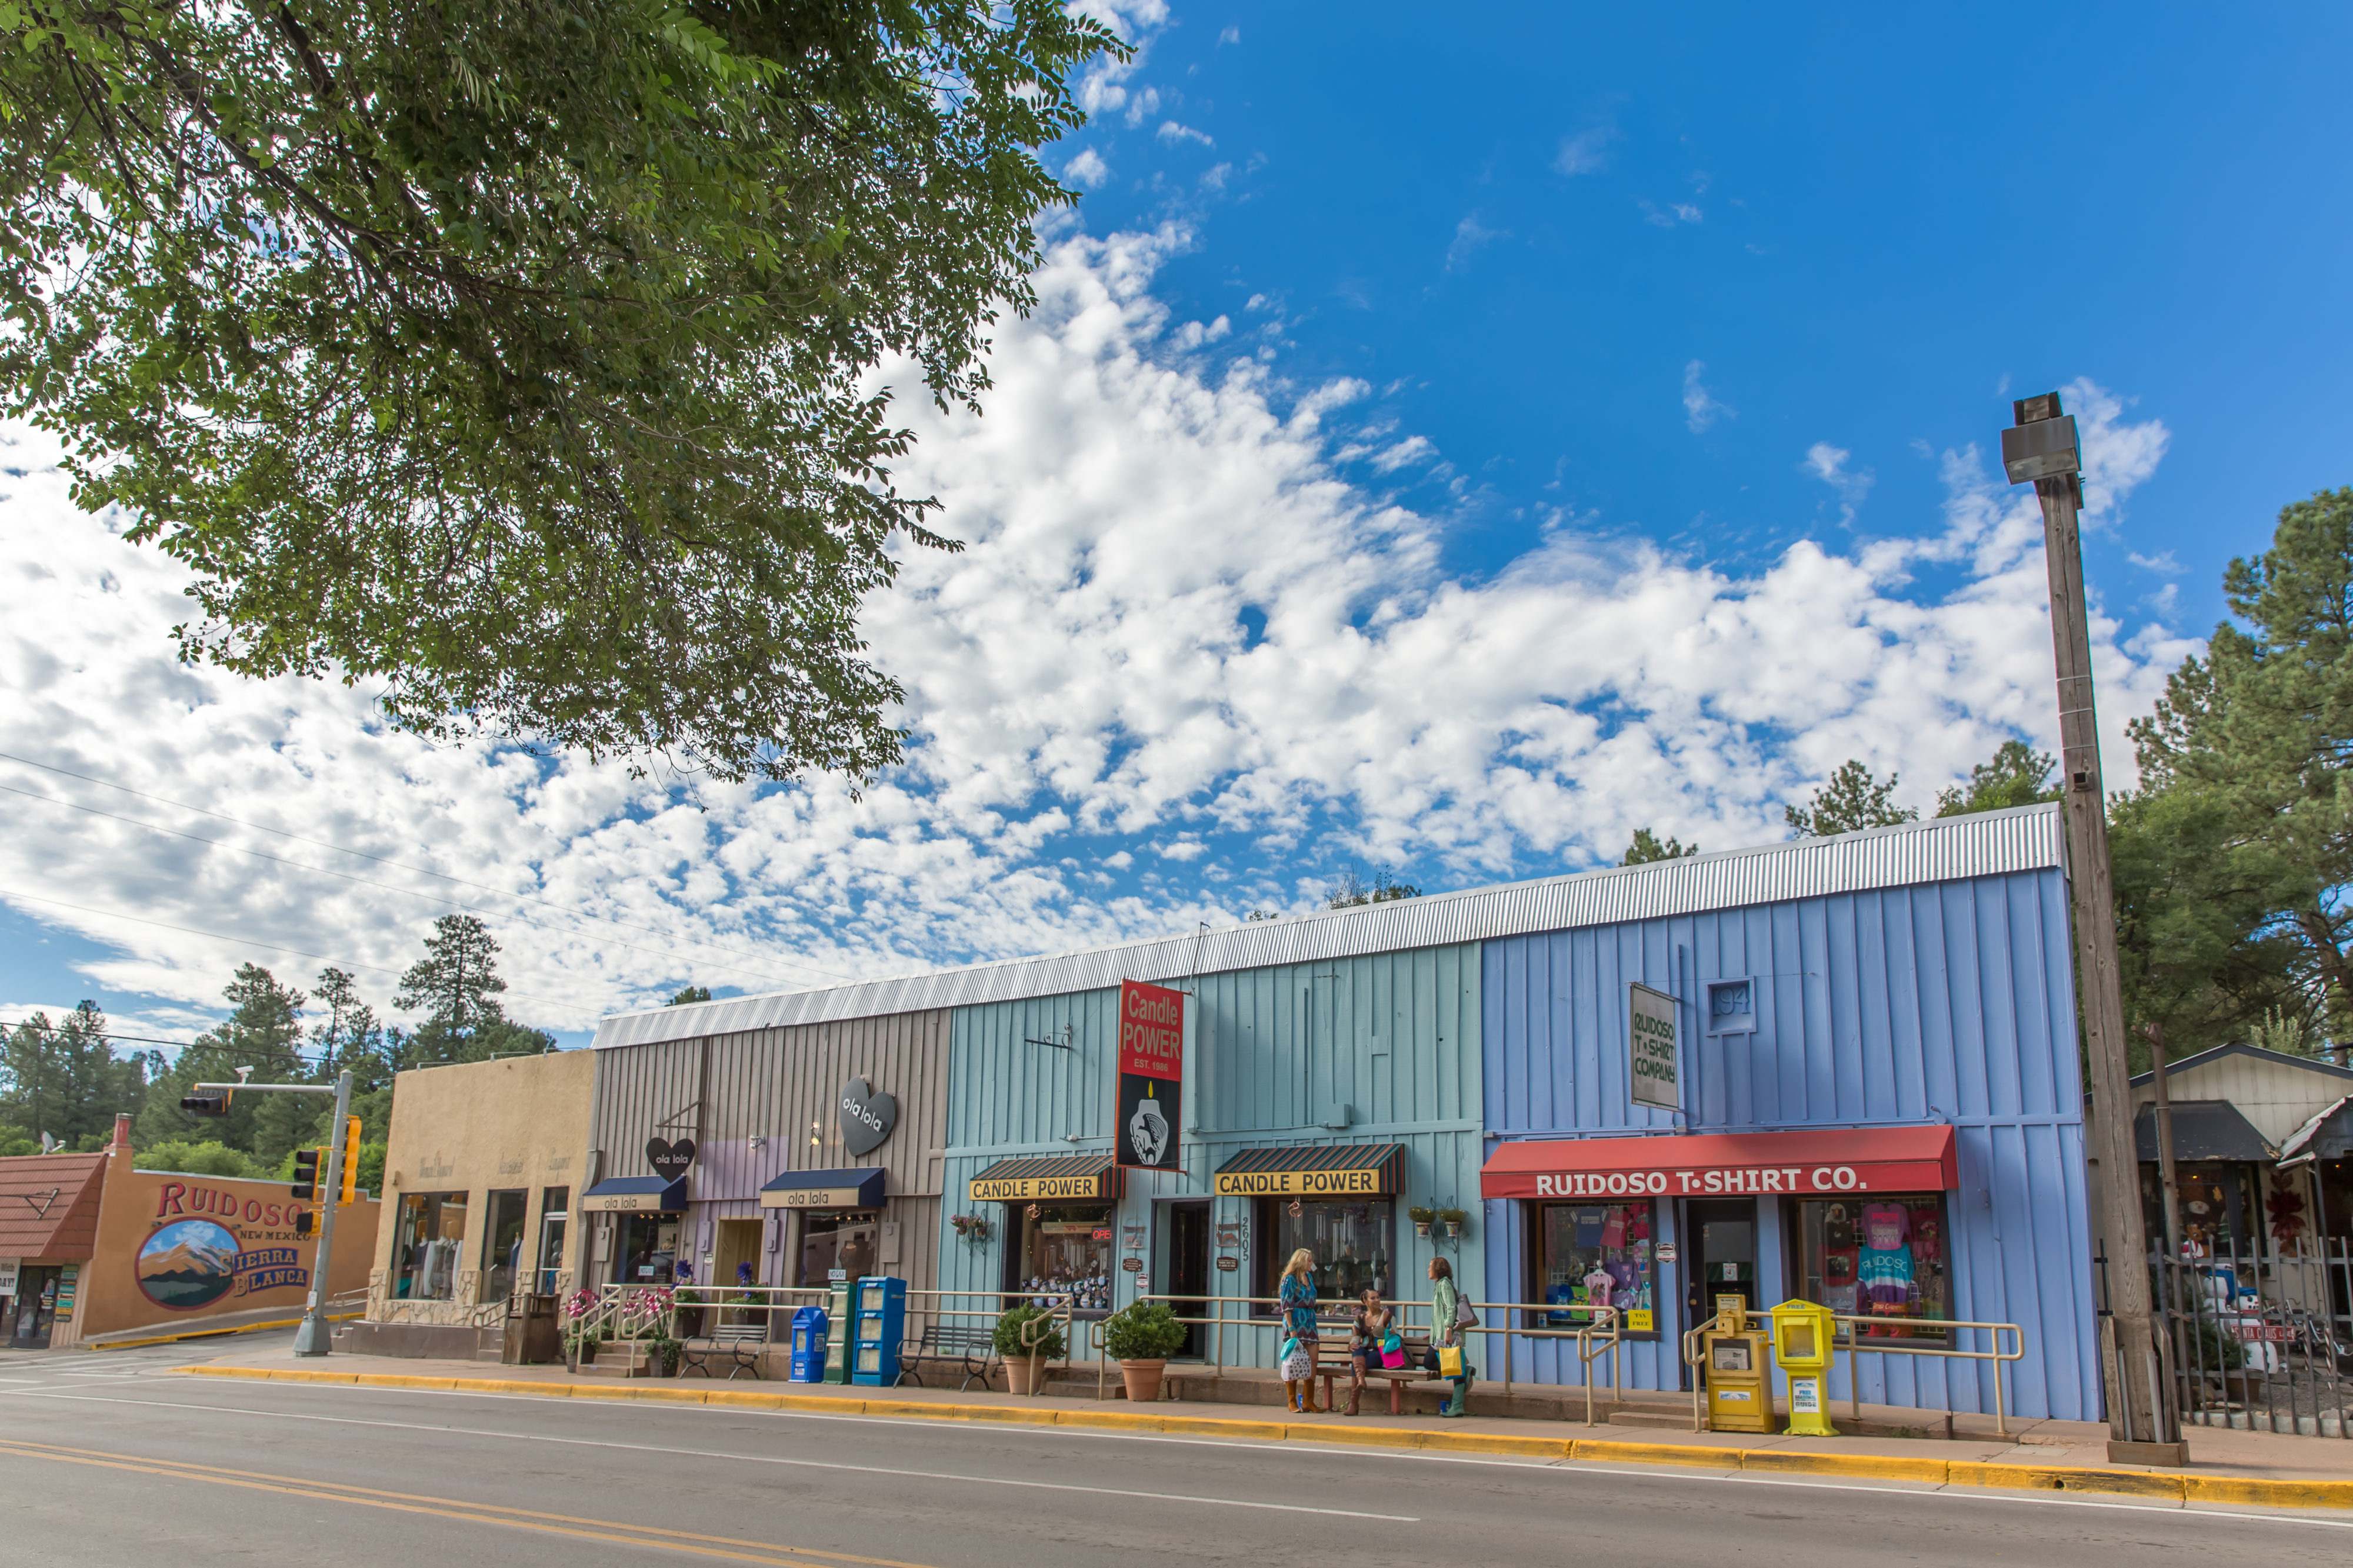 clothing boutiques and New Agey shops in "downtown" Ruidoso